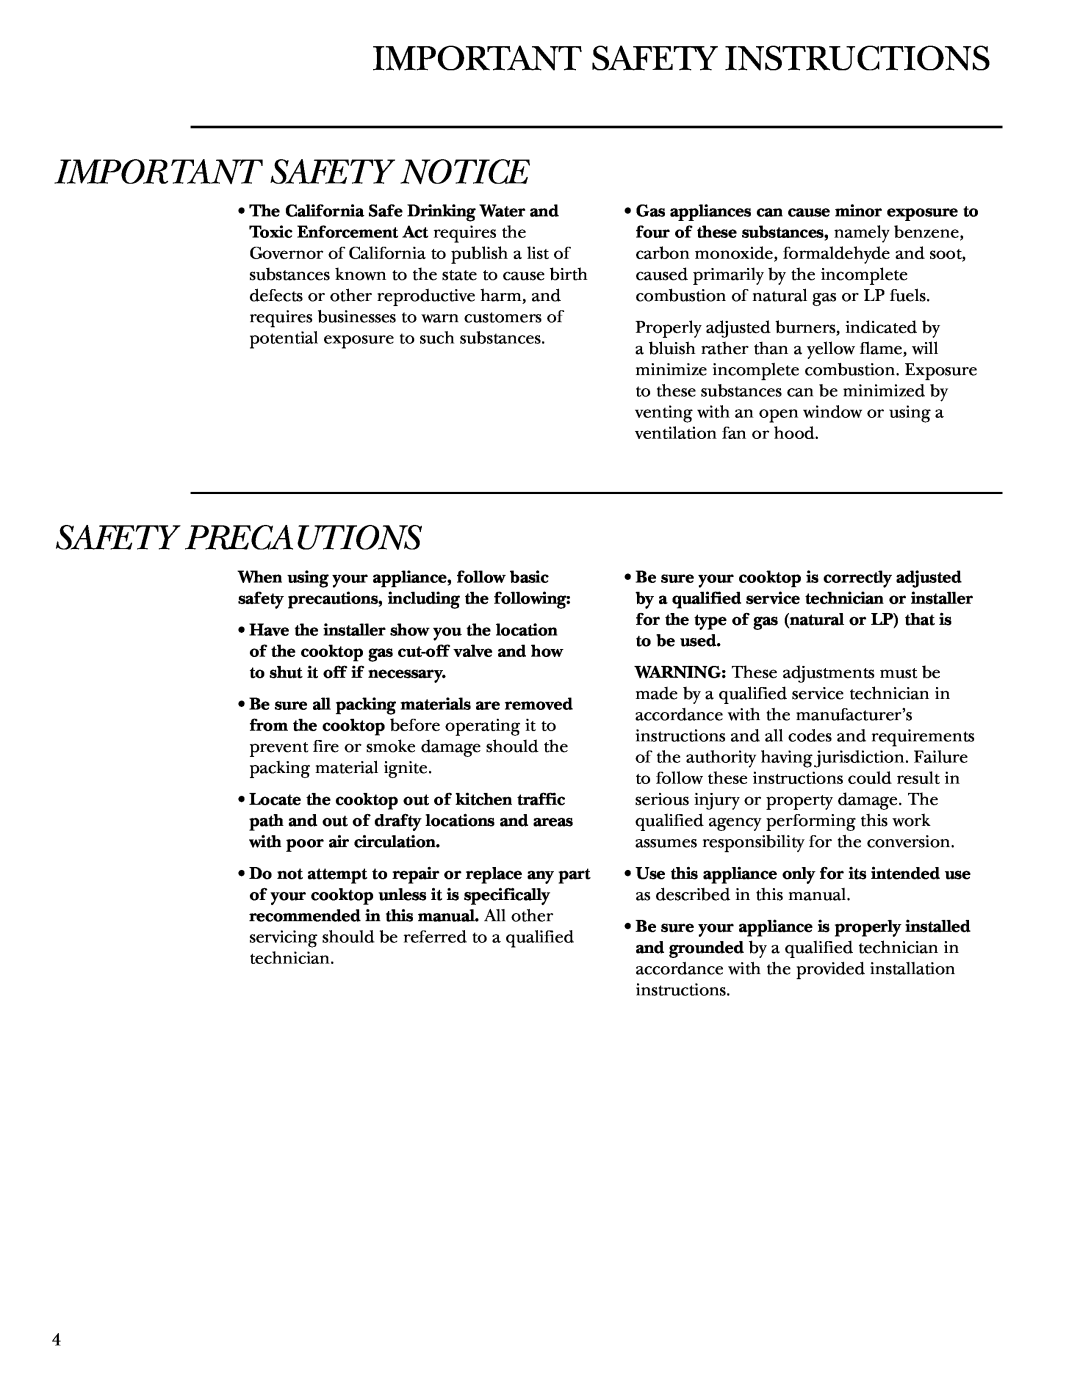 GE 36 owner manual Important Safety Instructions, Important Safety Notice, Safety Precautions 